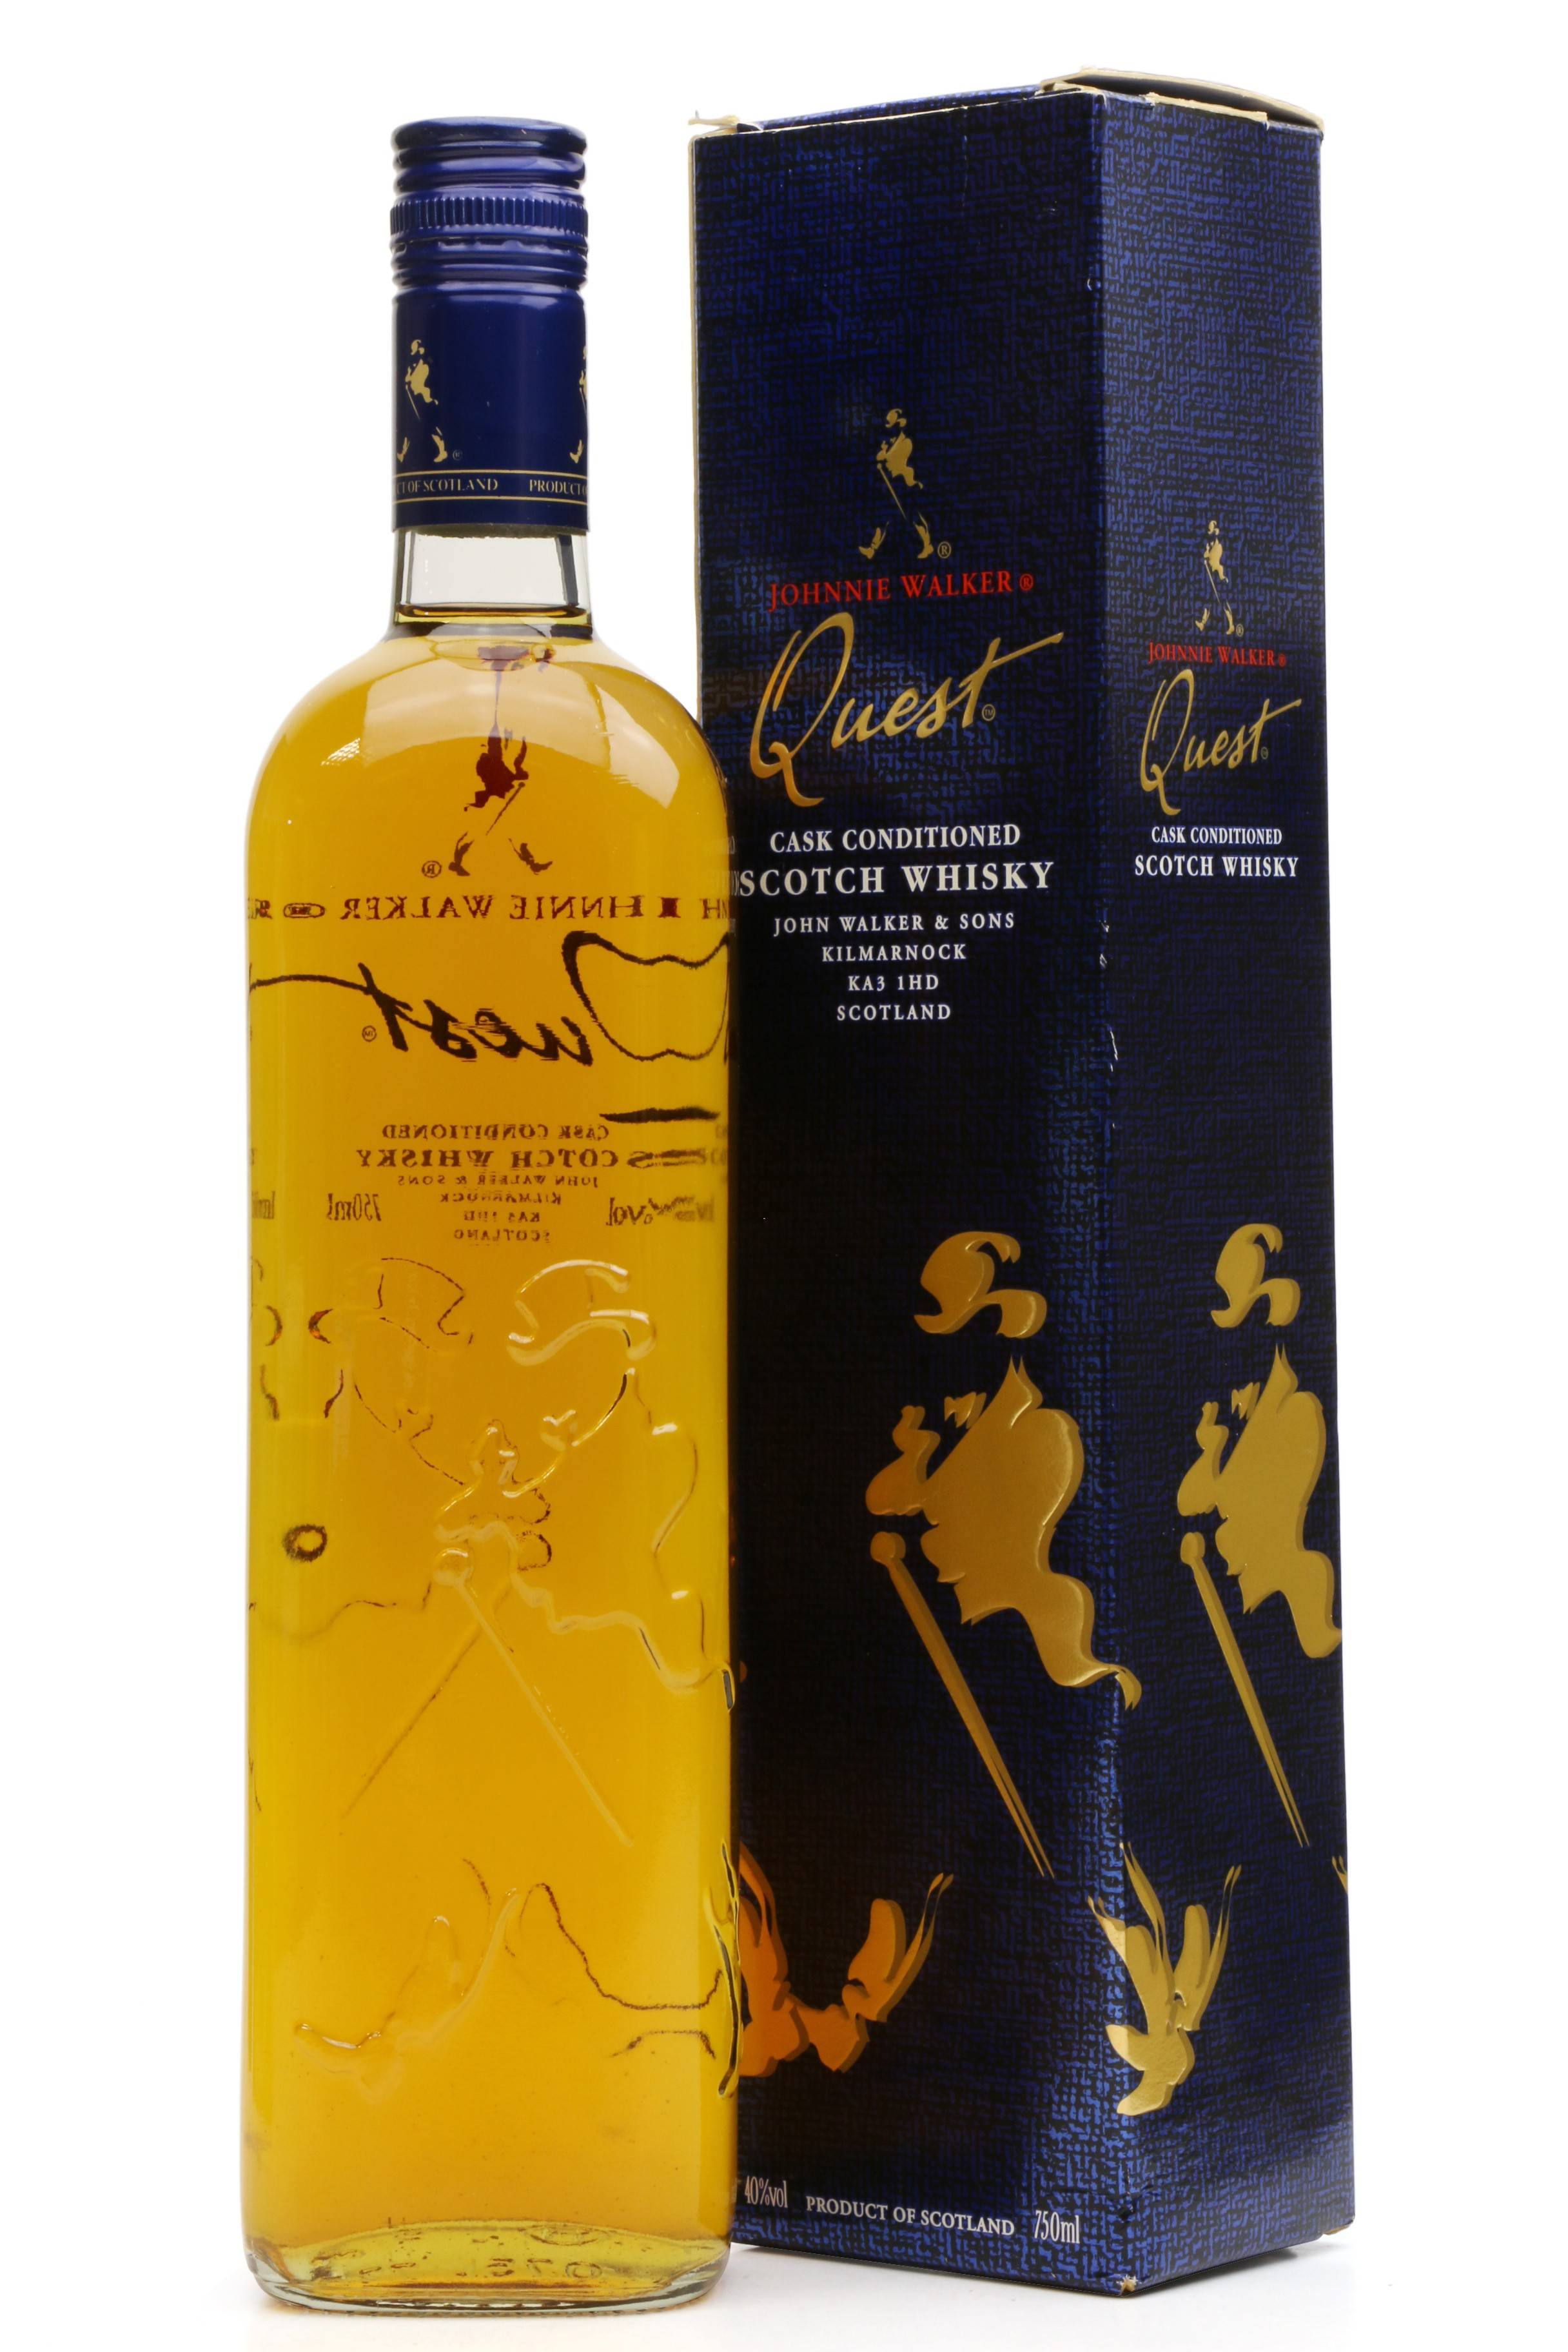 Johnnie Walker Quest - Just Whisky Auctions